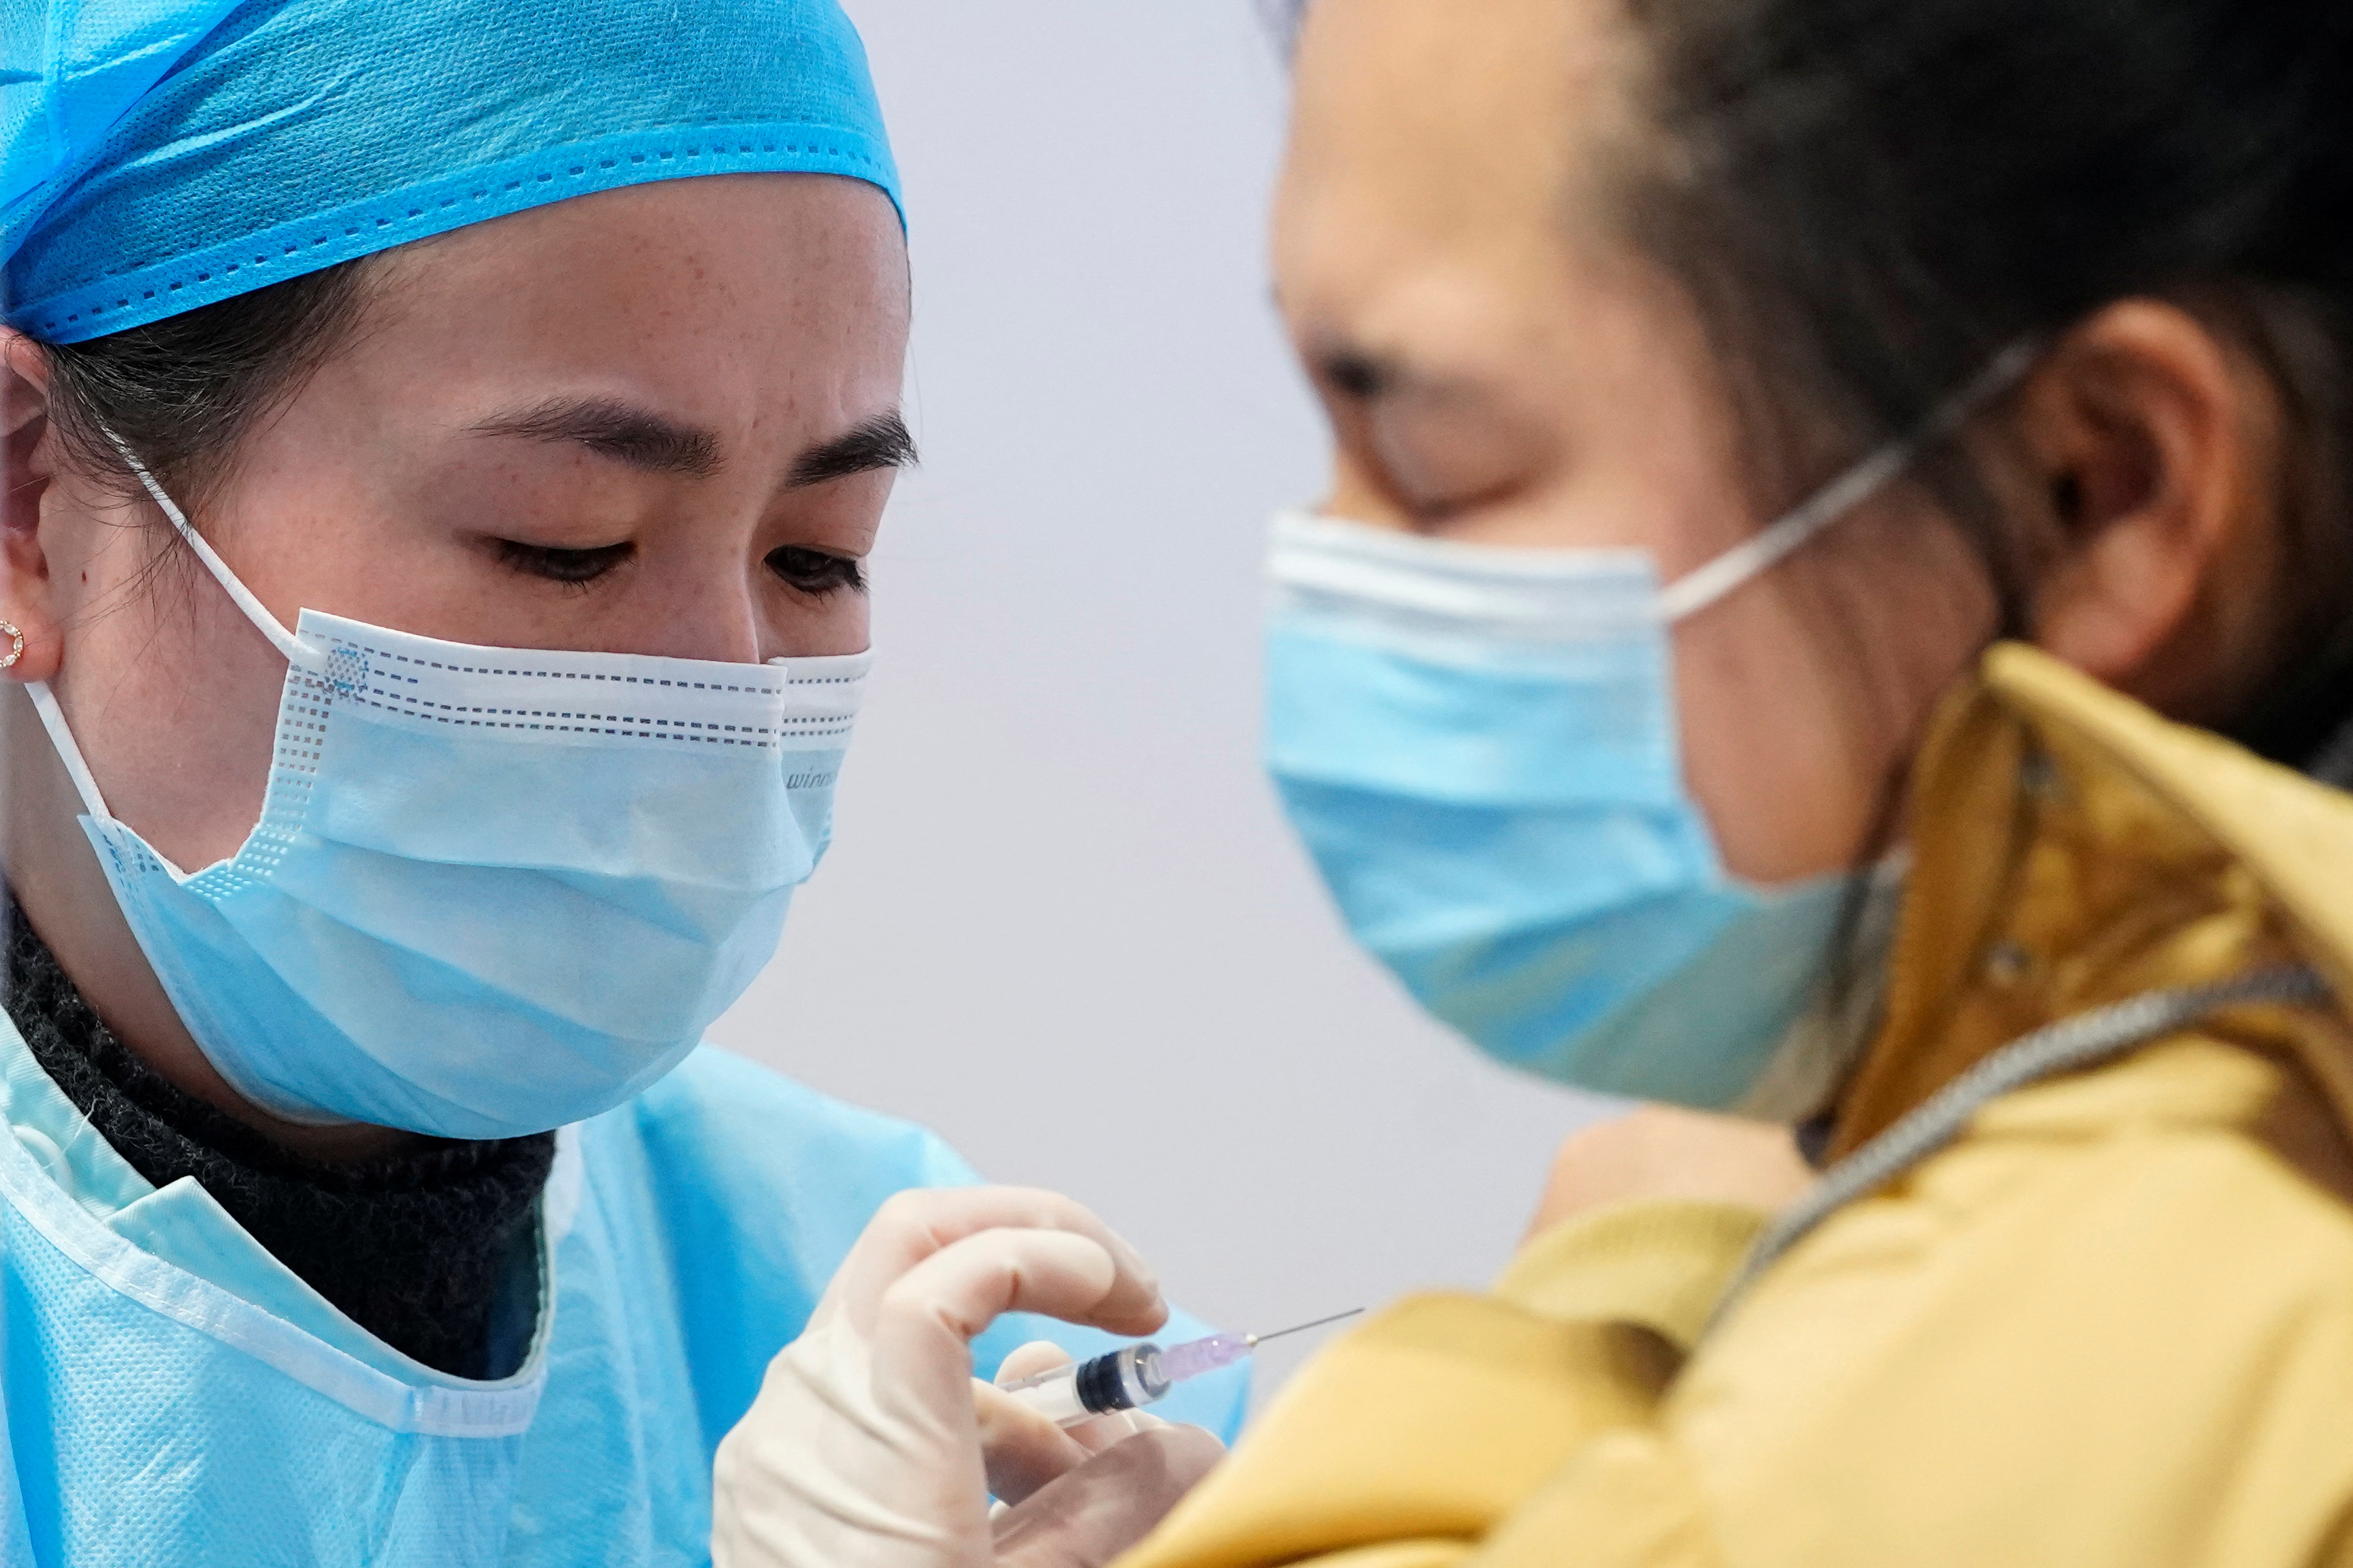 A medical worker prepares to administer a dose of a coronavirus disease (COVID-19) vaccine to a woman at a vaccination site, during a government-organised visit, following the coronavirus disease (COVID-19) outbreak, in Shanghai, China January 19, 2021. REUTERS/Aly Song - RC2WAL9RG72Y